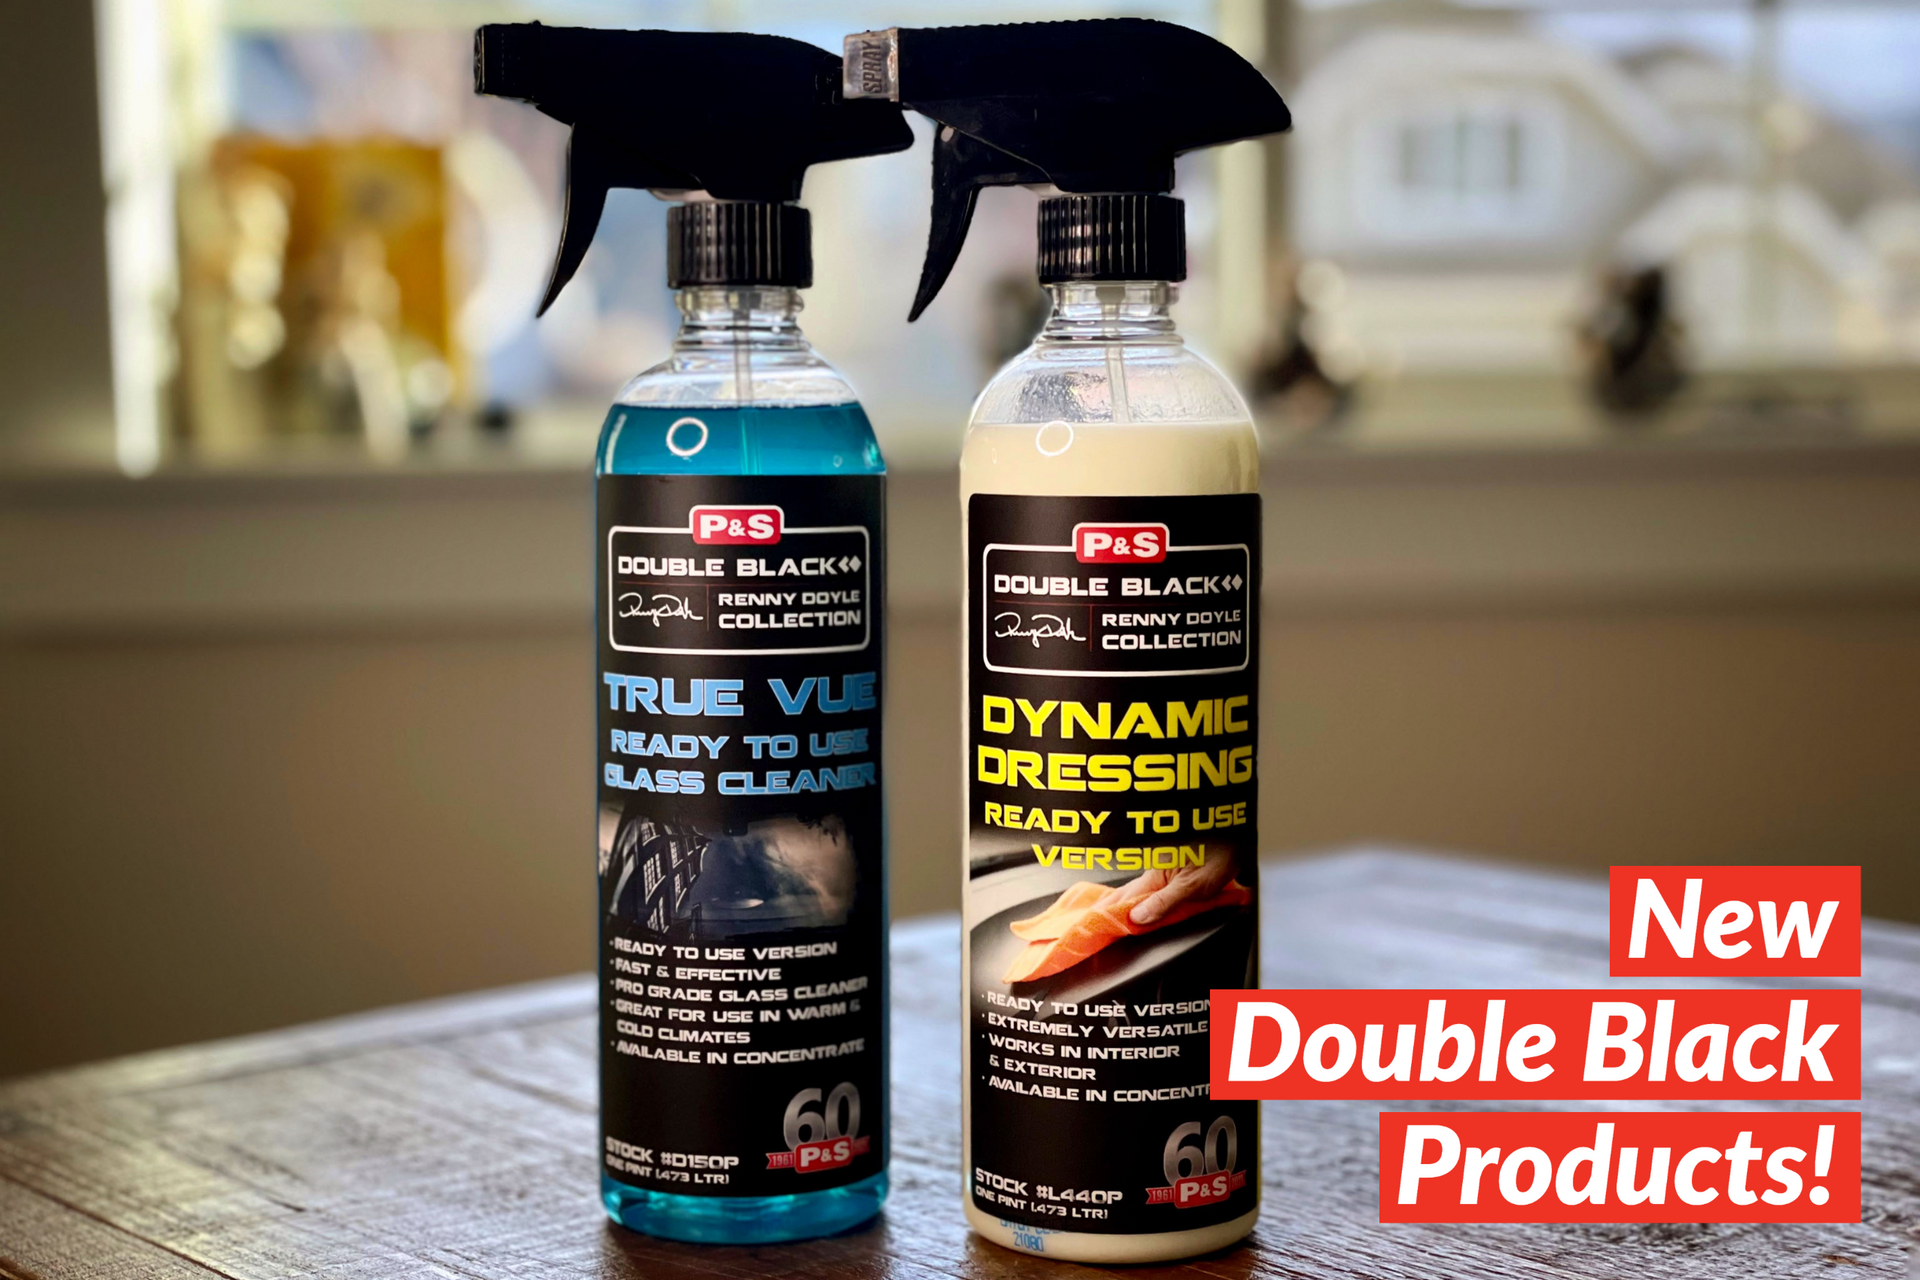 New Double Black Products